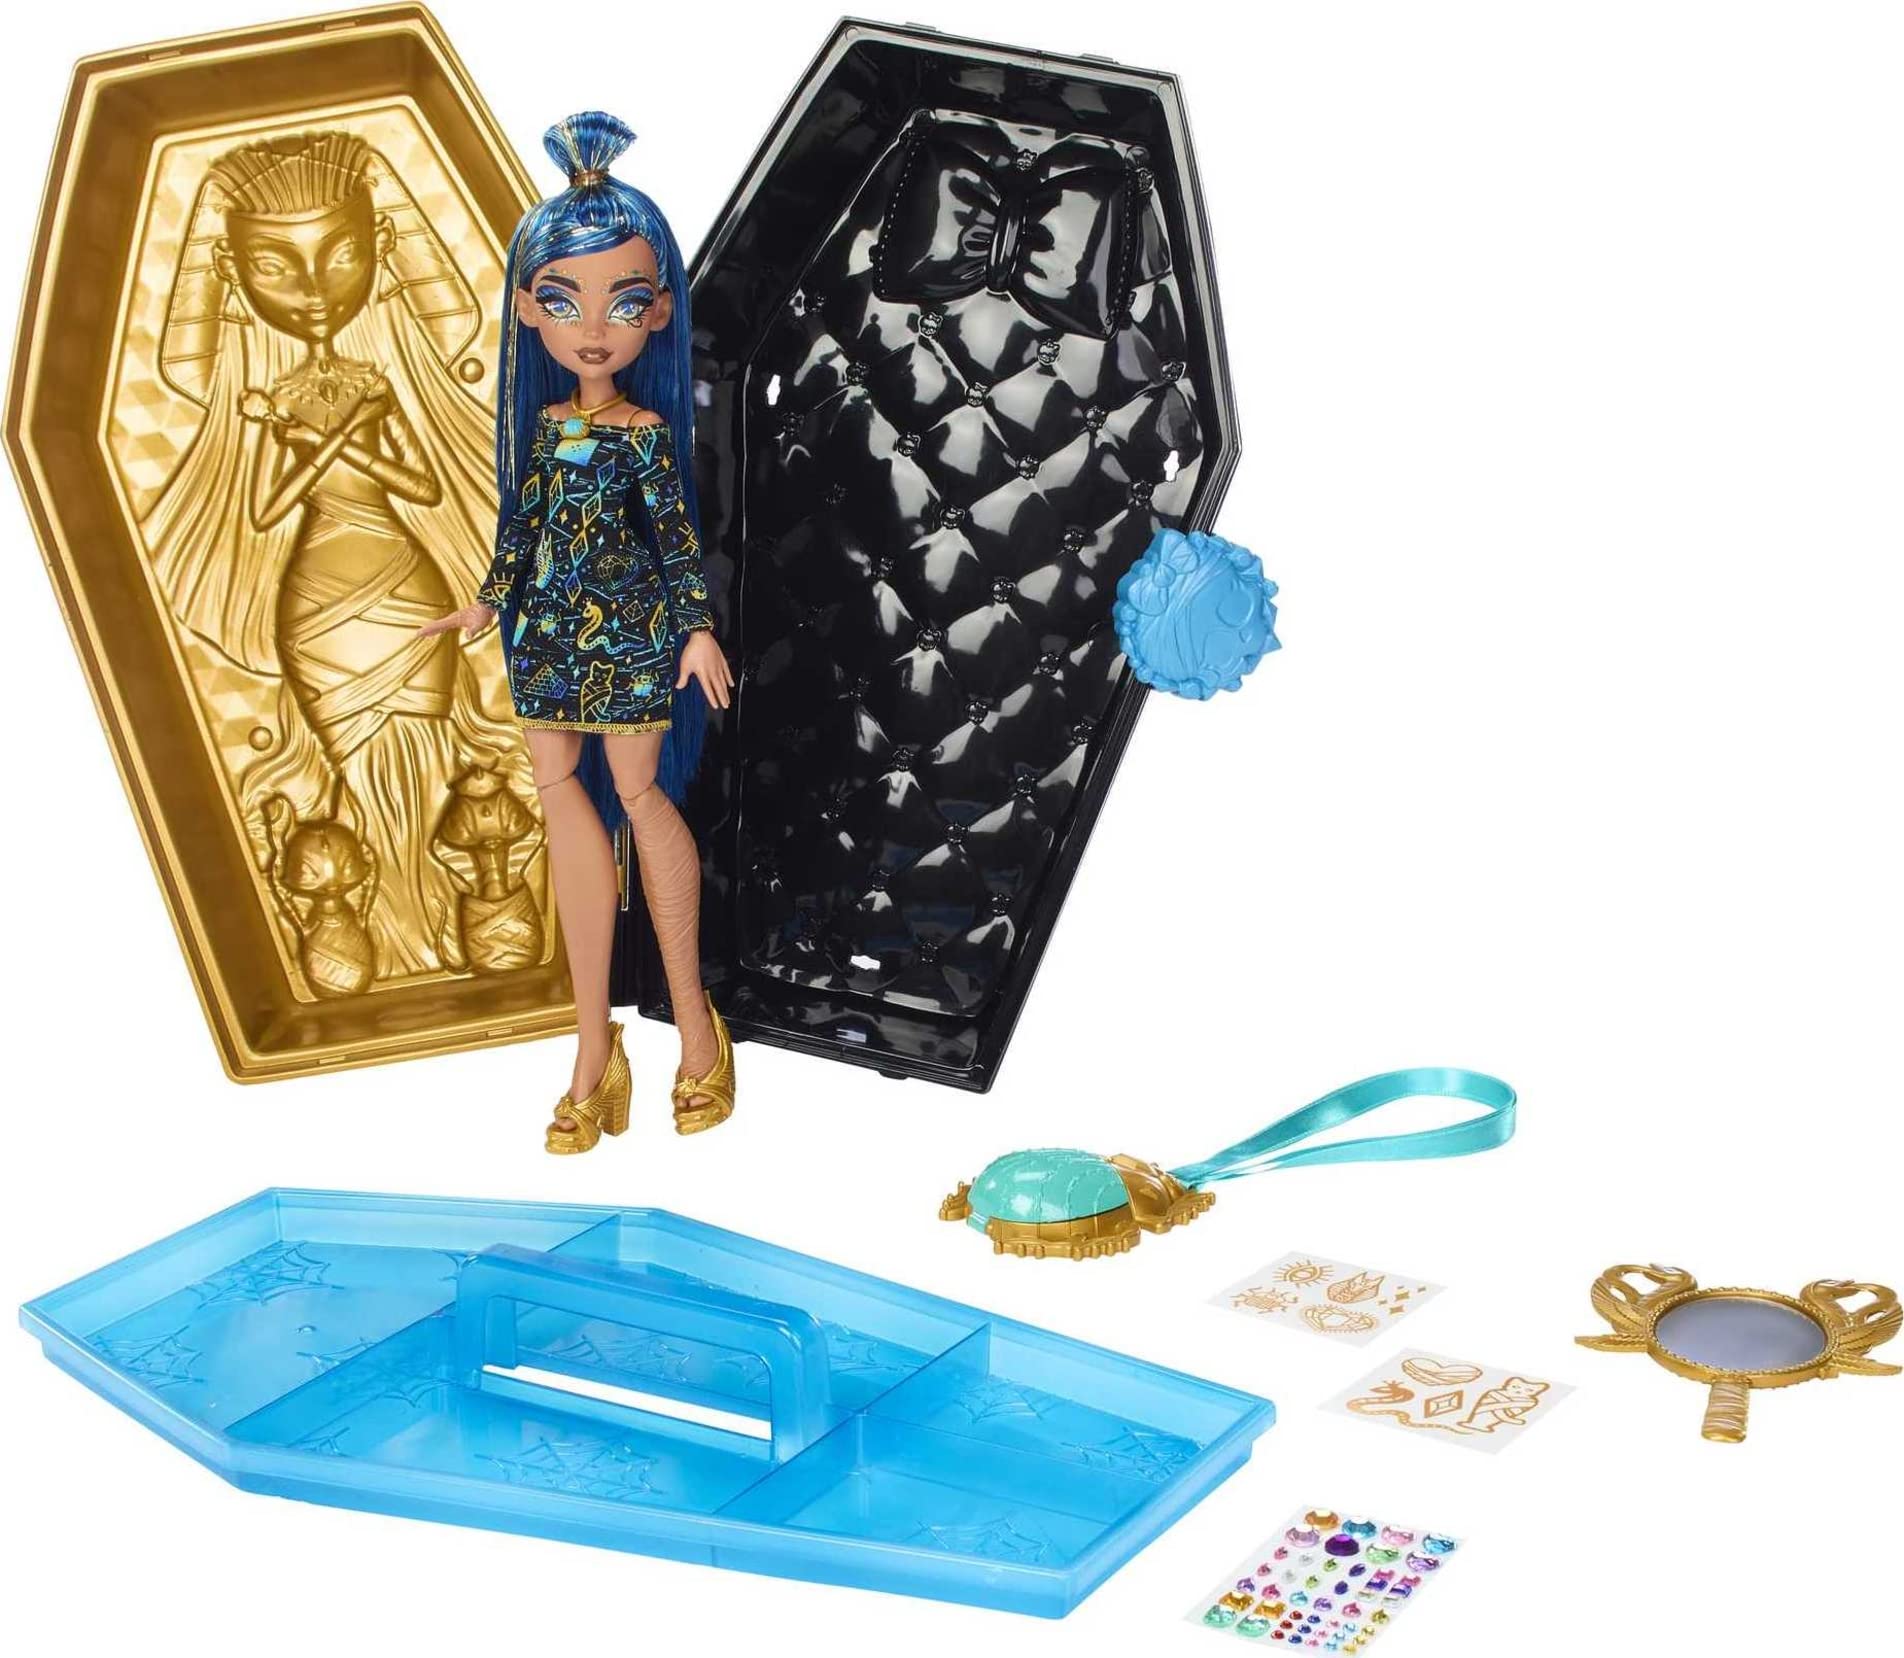 Monster High Doll and Beauty Kit, Cleo De Nile Golden Glam Case with Tattoos and Necklace for Kids (Amazon Exclusive)